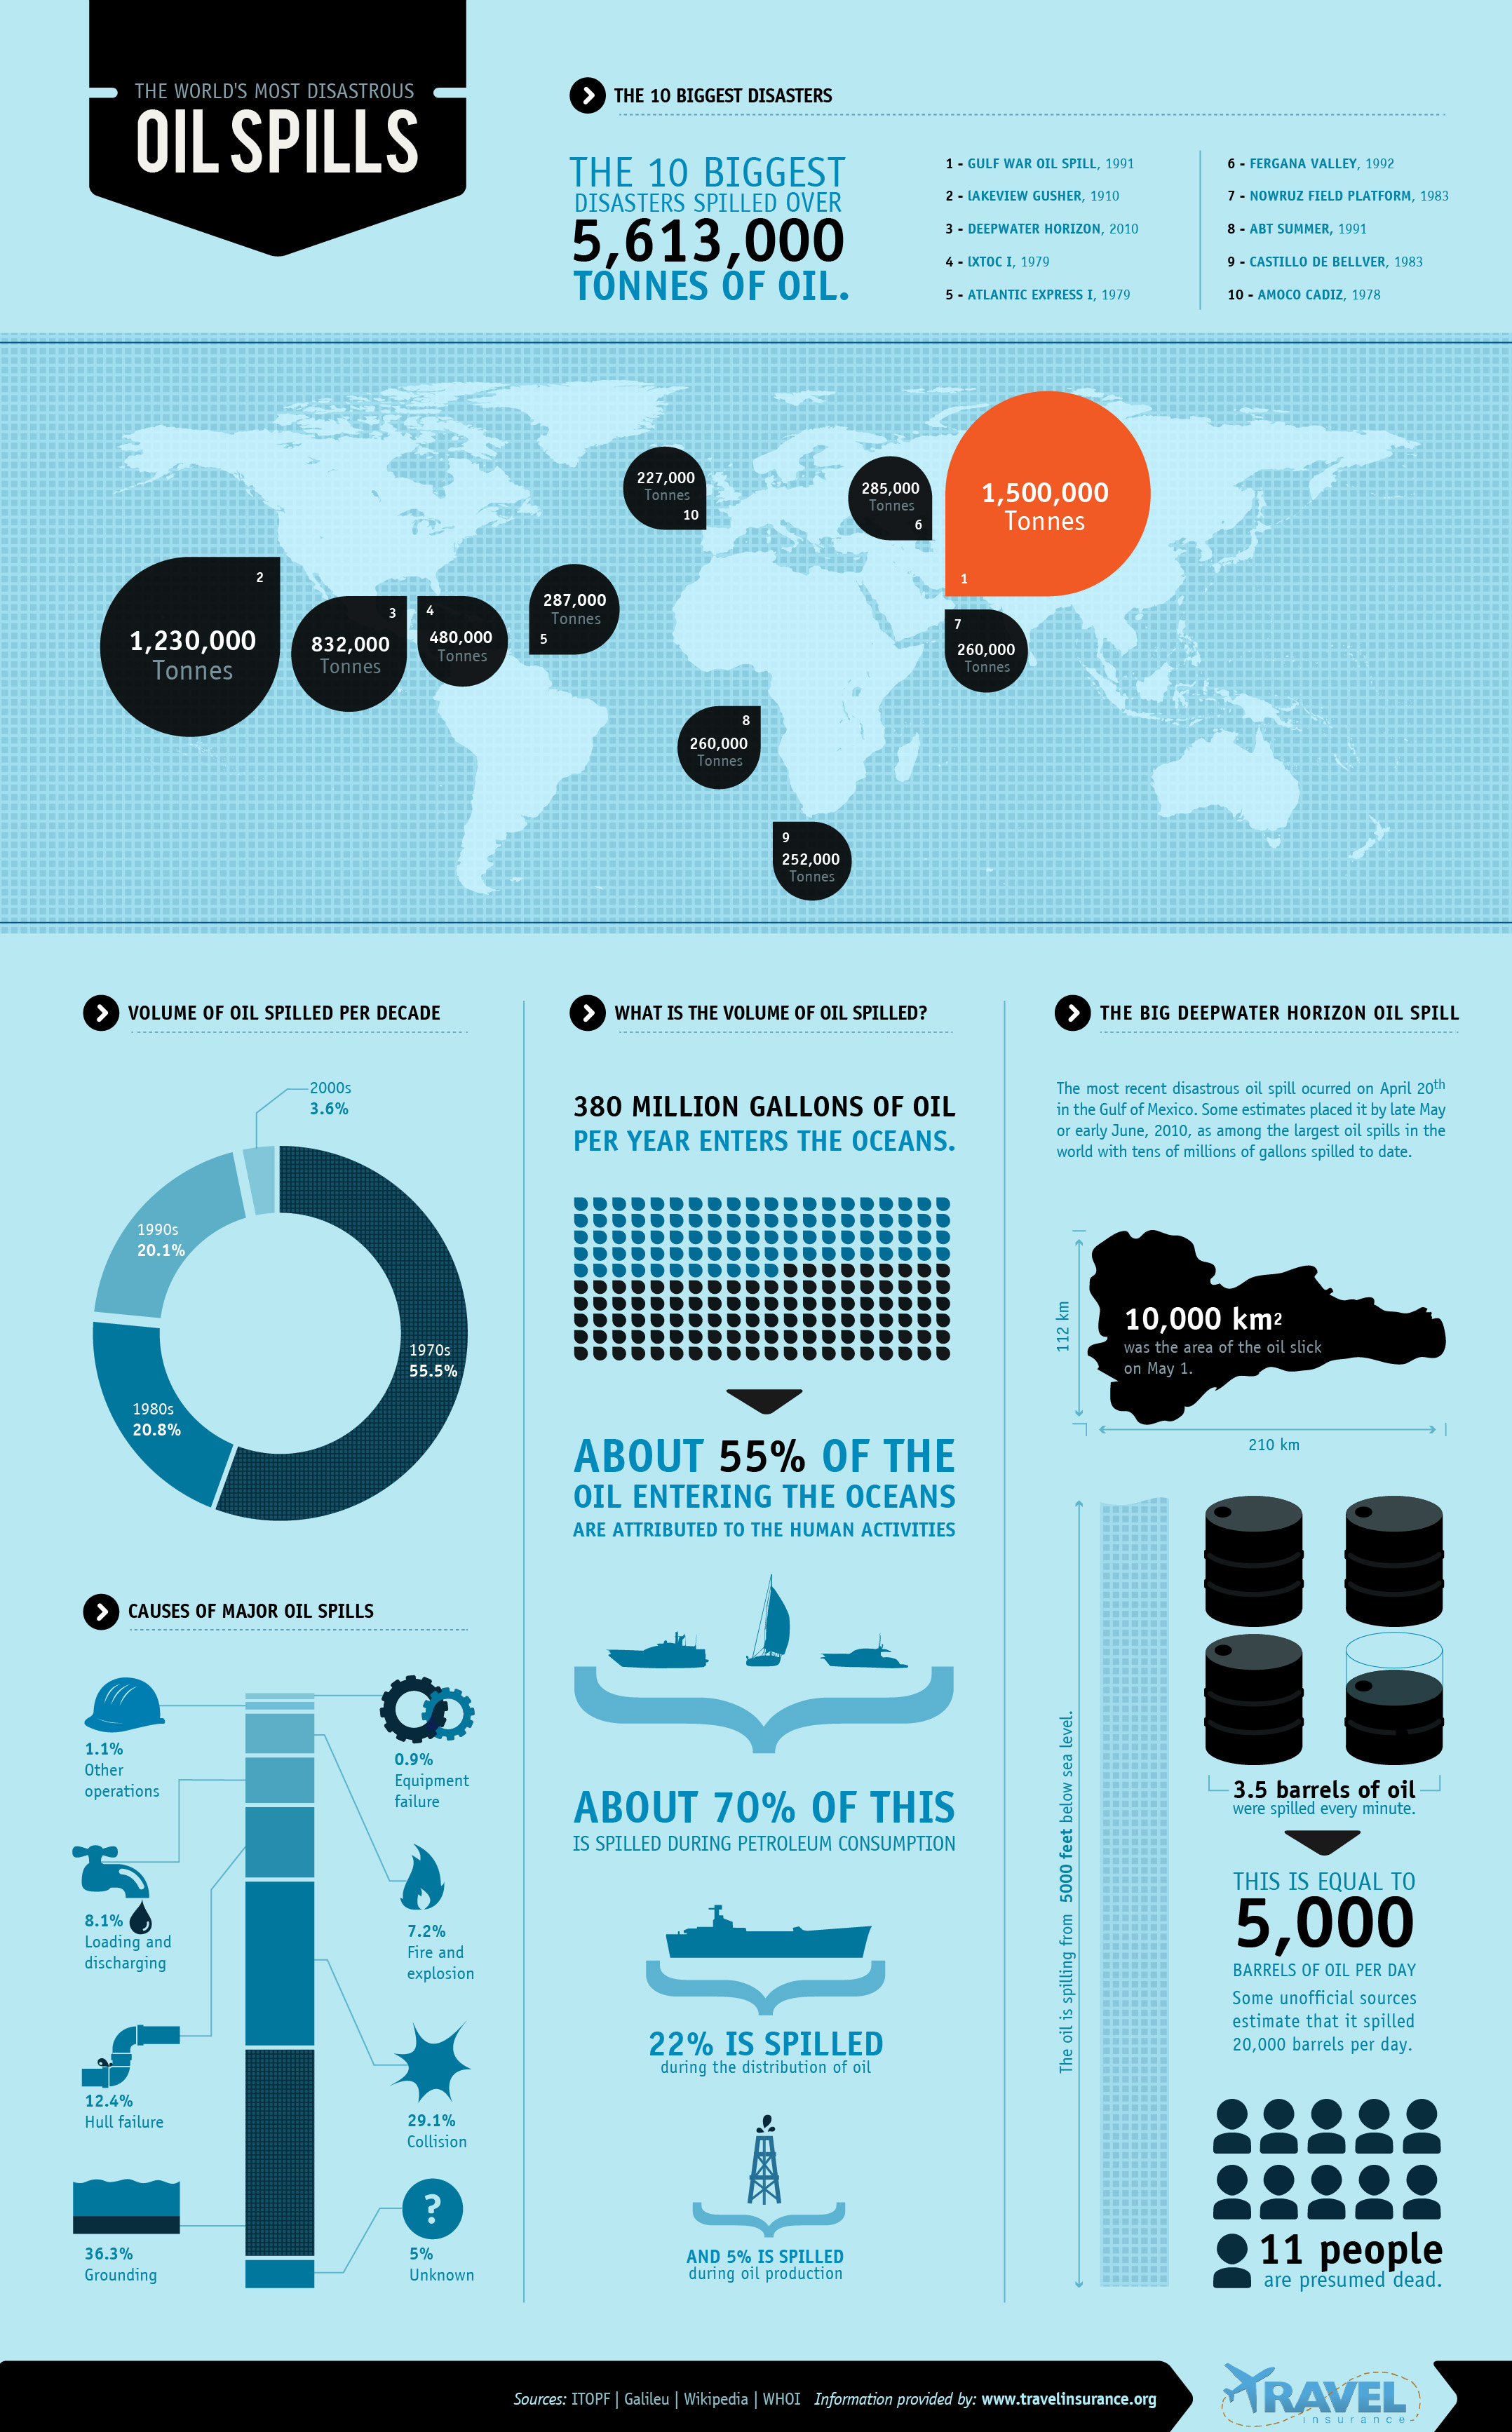 The World's Most Disastrous Oil Spills, An Infographic